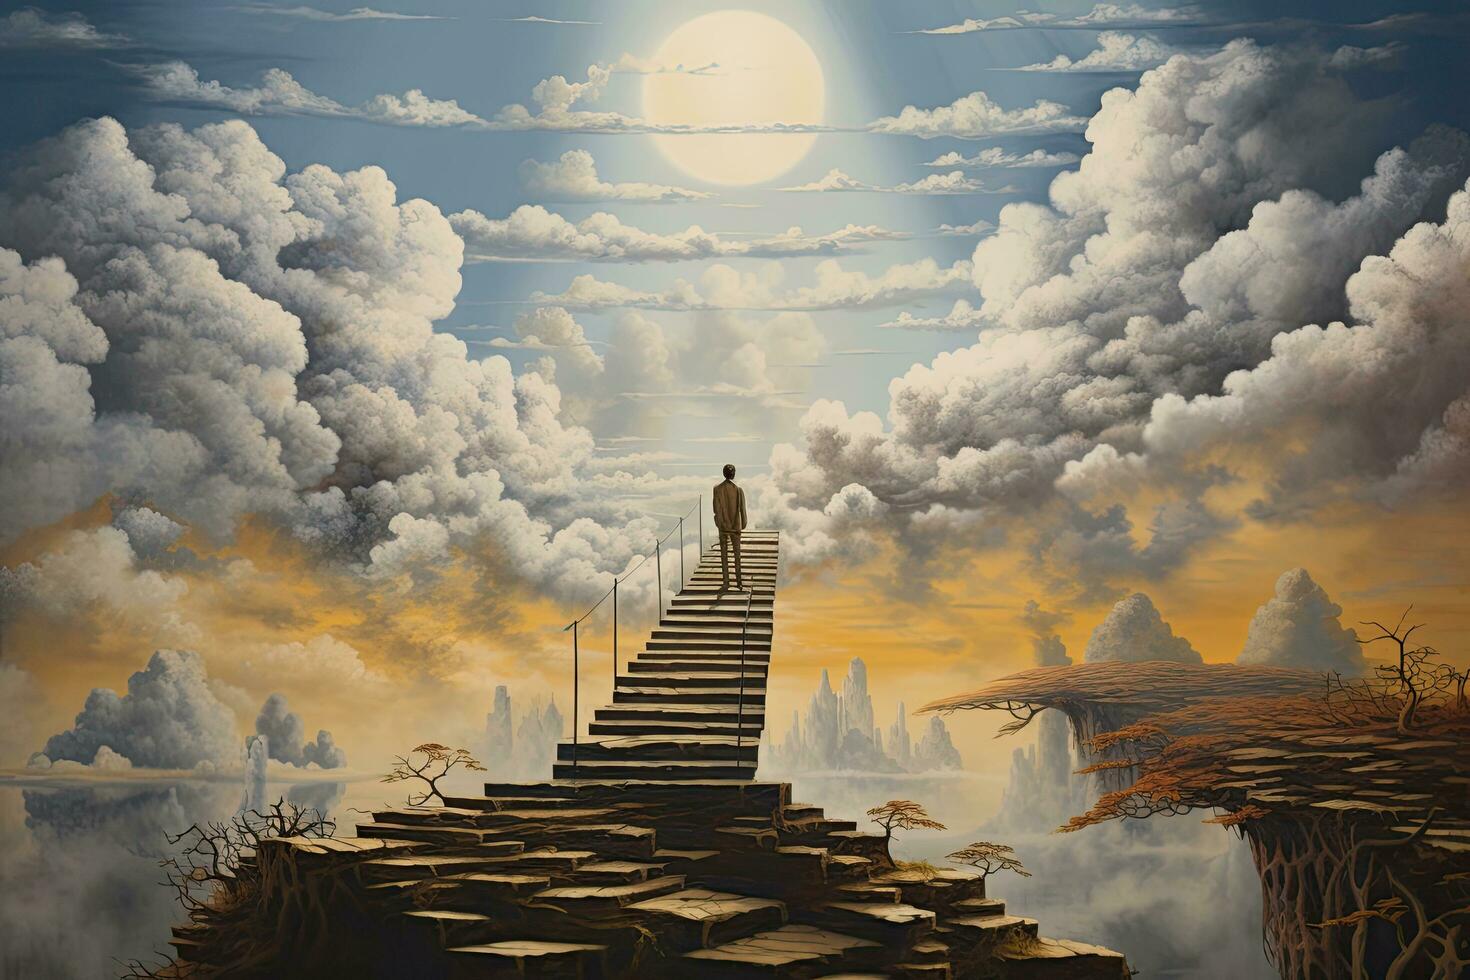 Conceptual image of a man standing on the top of a stairway to heaven, breathtaking painting capturing the beauty of the cloudy sky, AI Generated photo